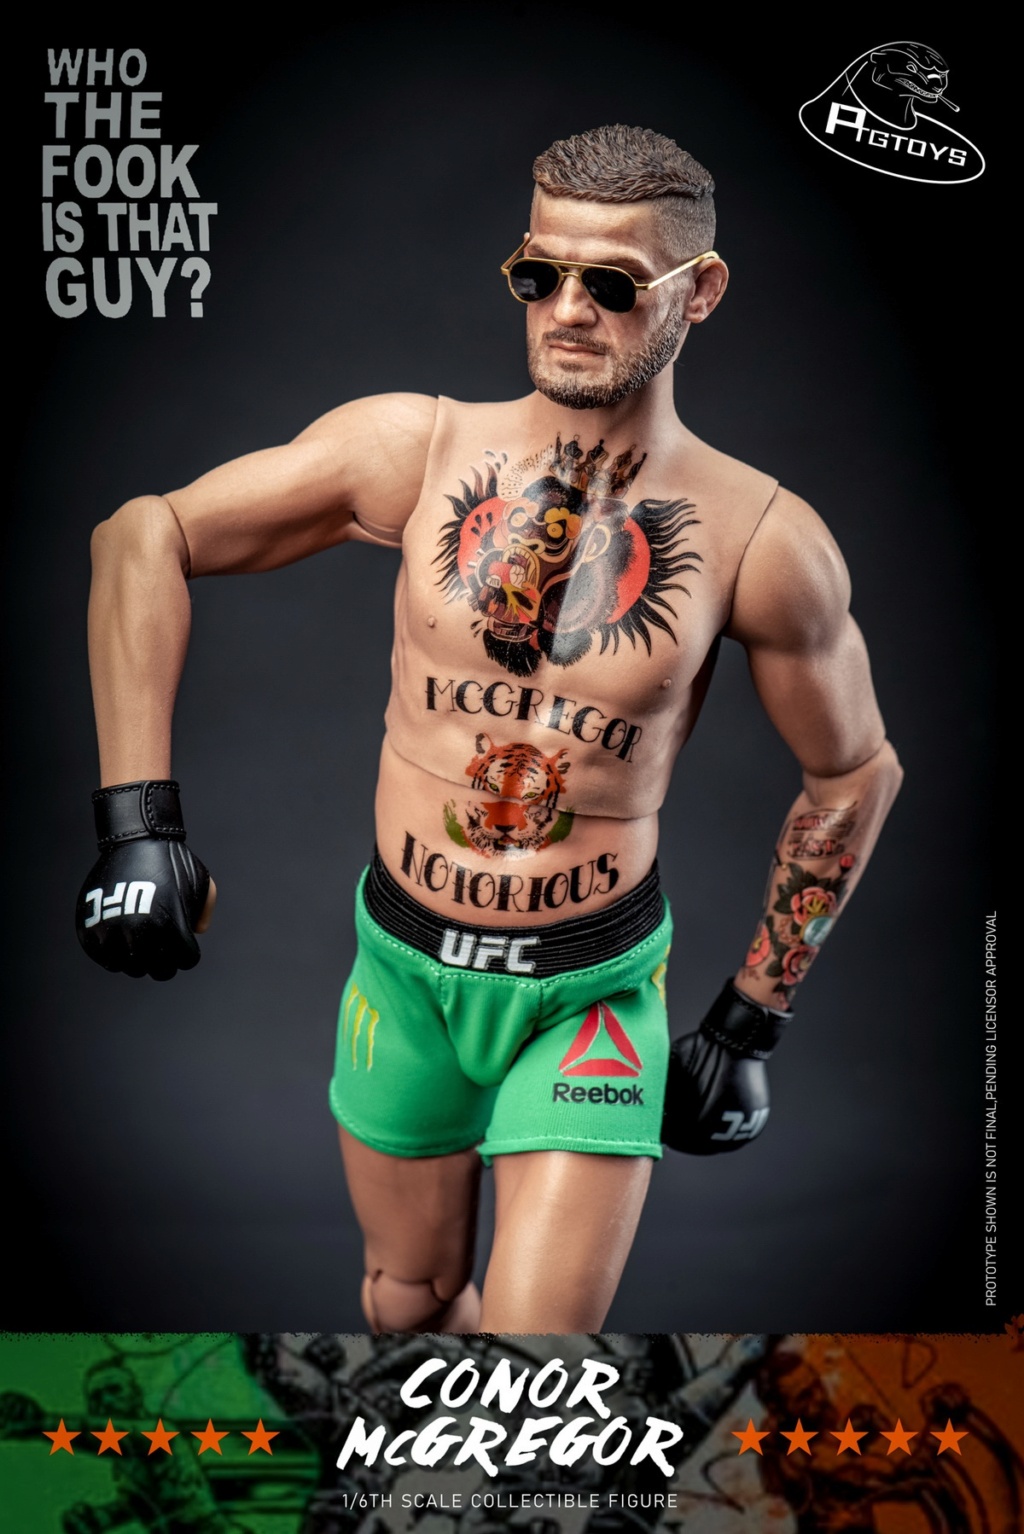 NEW PRODUCT: PTGToys: 1/6 Conor MCGREGOR Action Figure  16552310